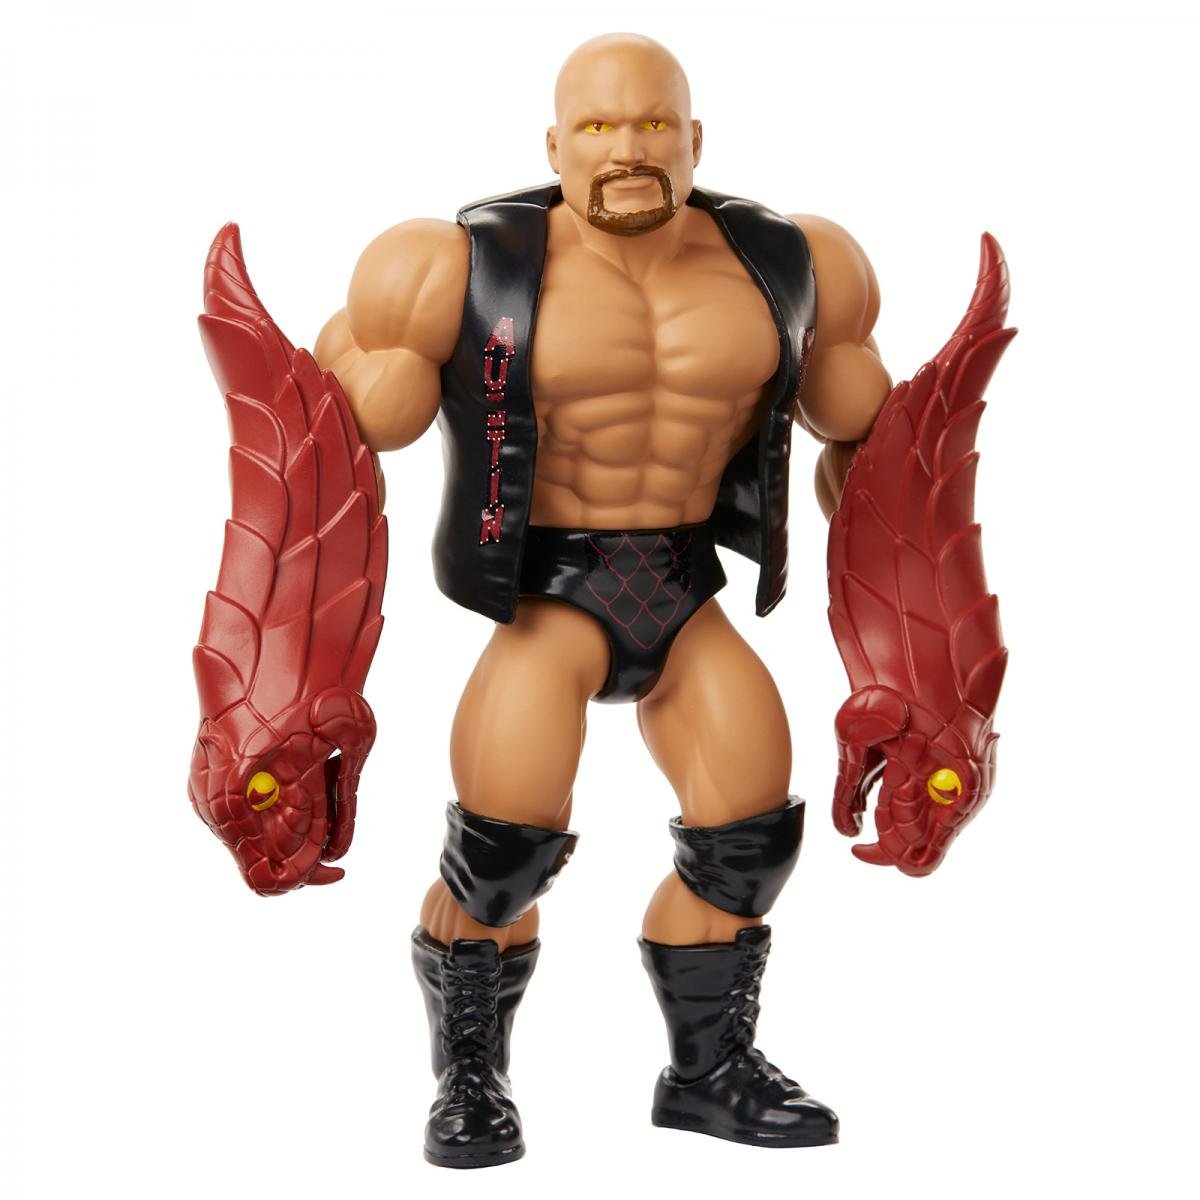 Stone cold masters of the WWE universe